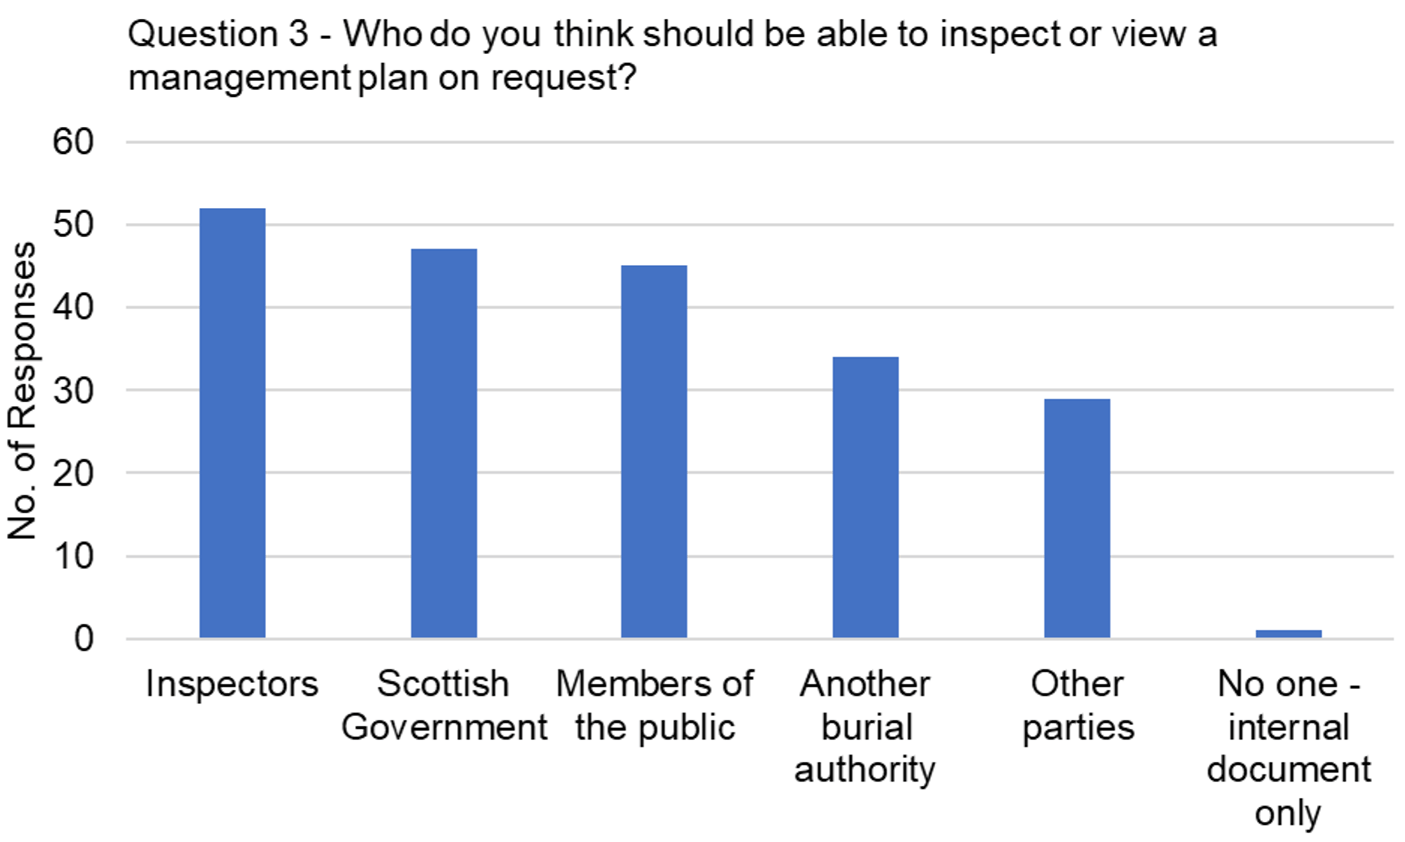 The graph visually presents the data from table 3, focussing on the responses to the question, "Who do you think should be able to inspect or view a management plan on request?"